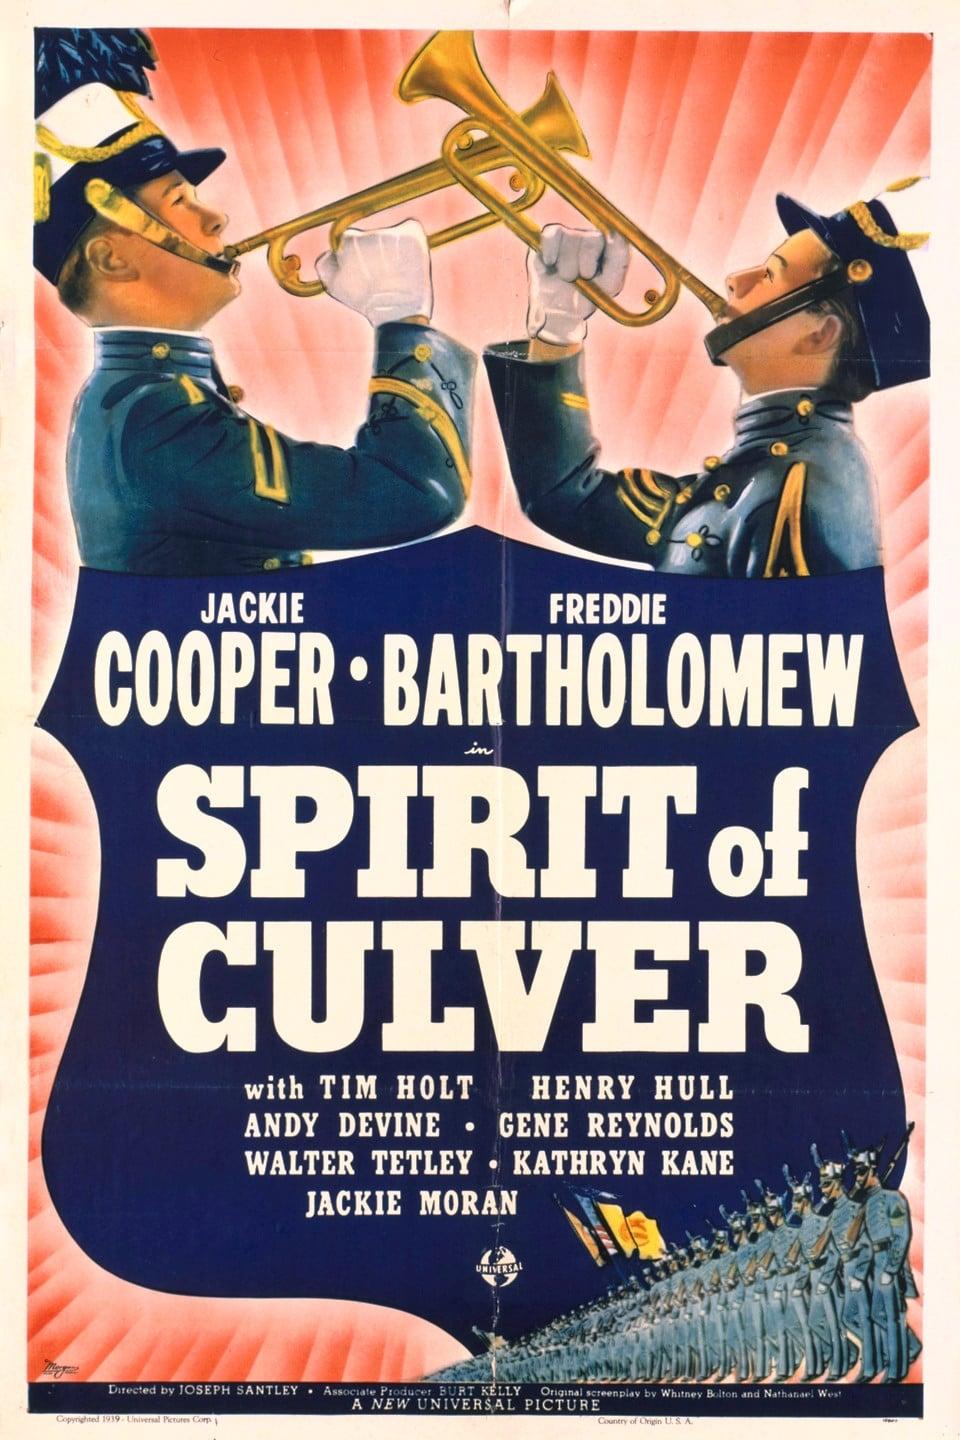 The Spirit of Culver poster